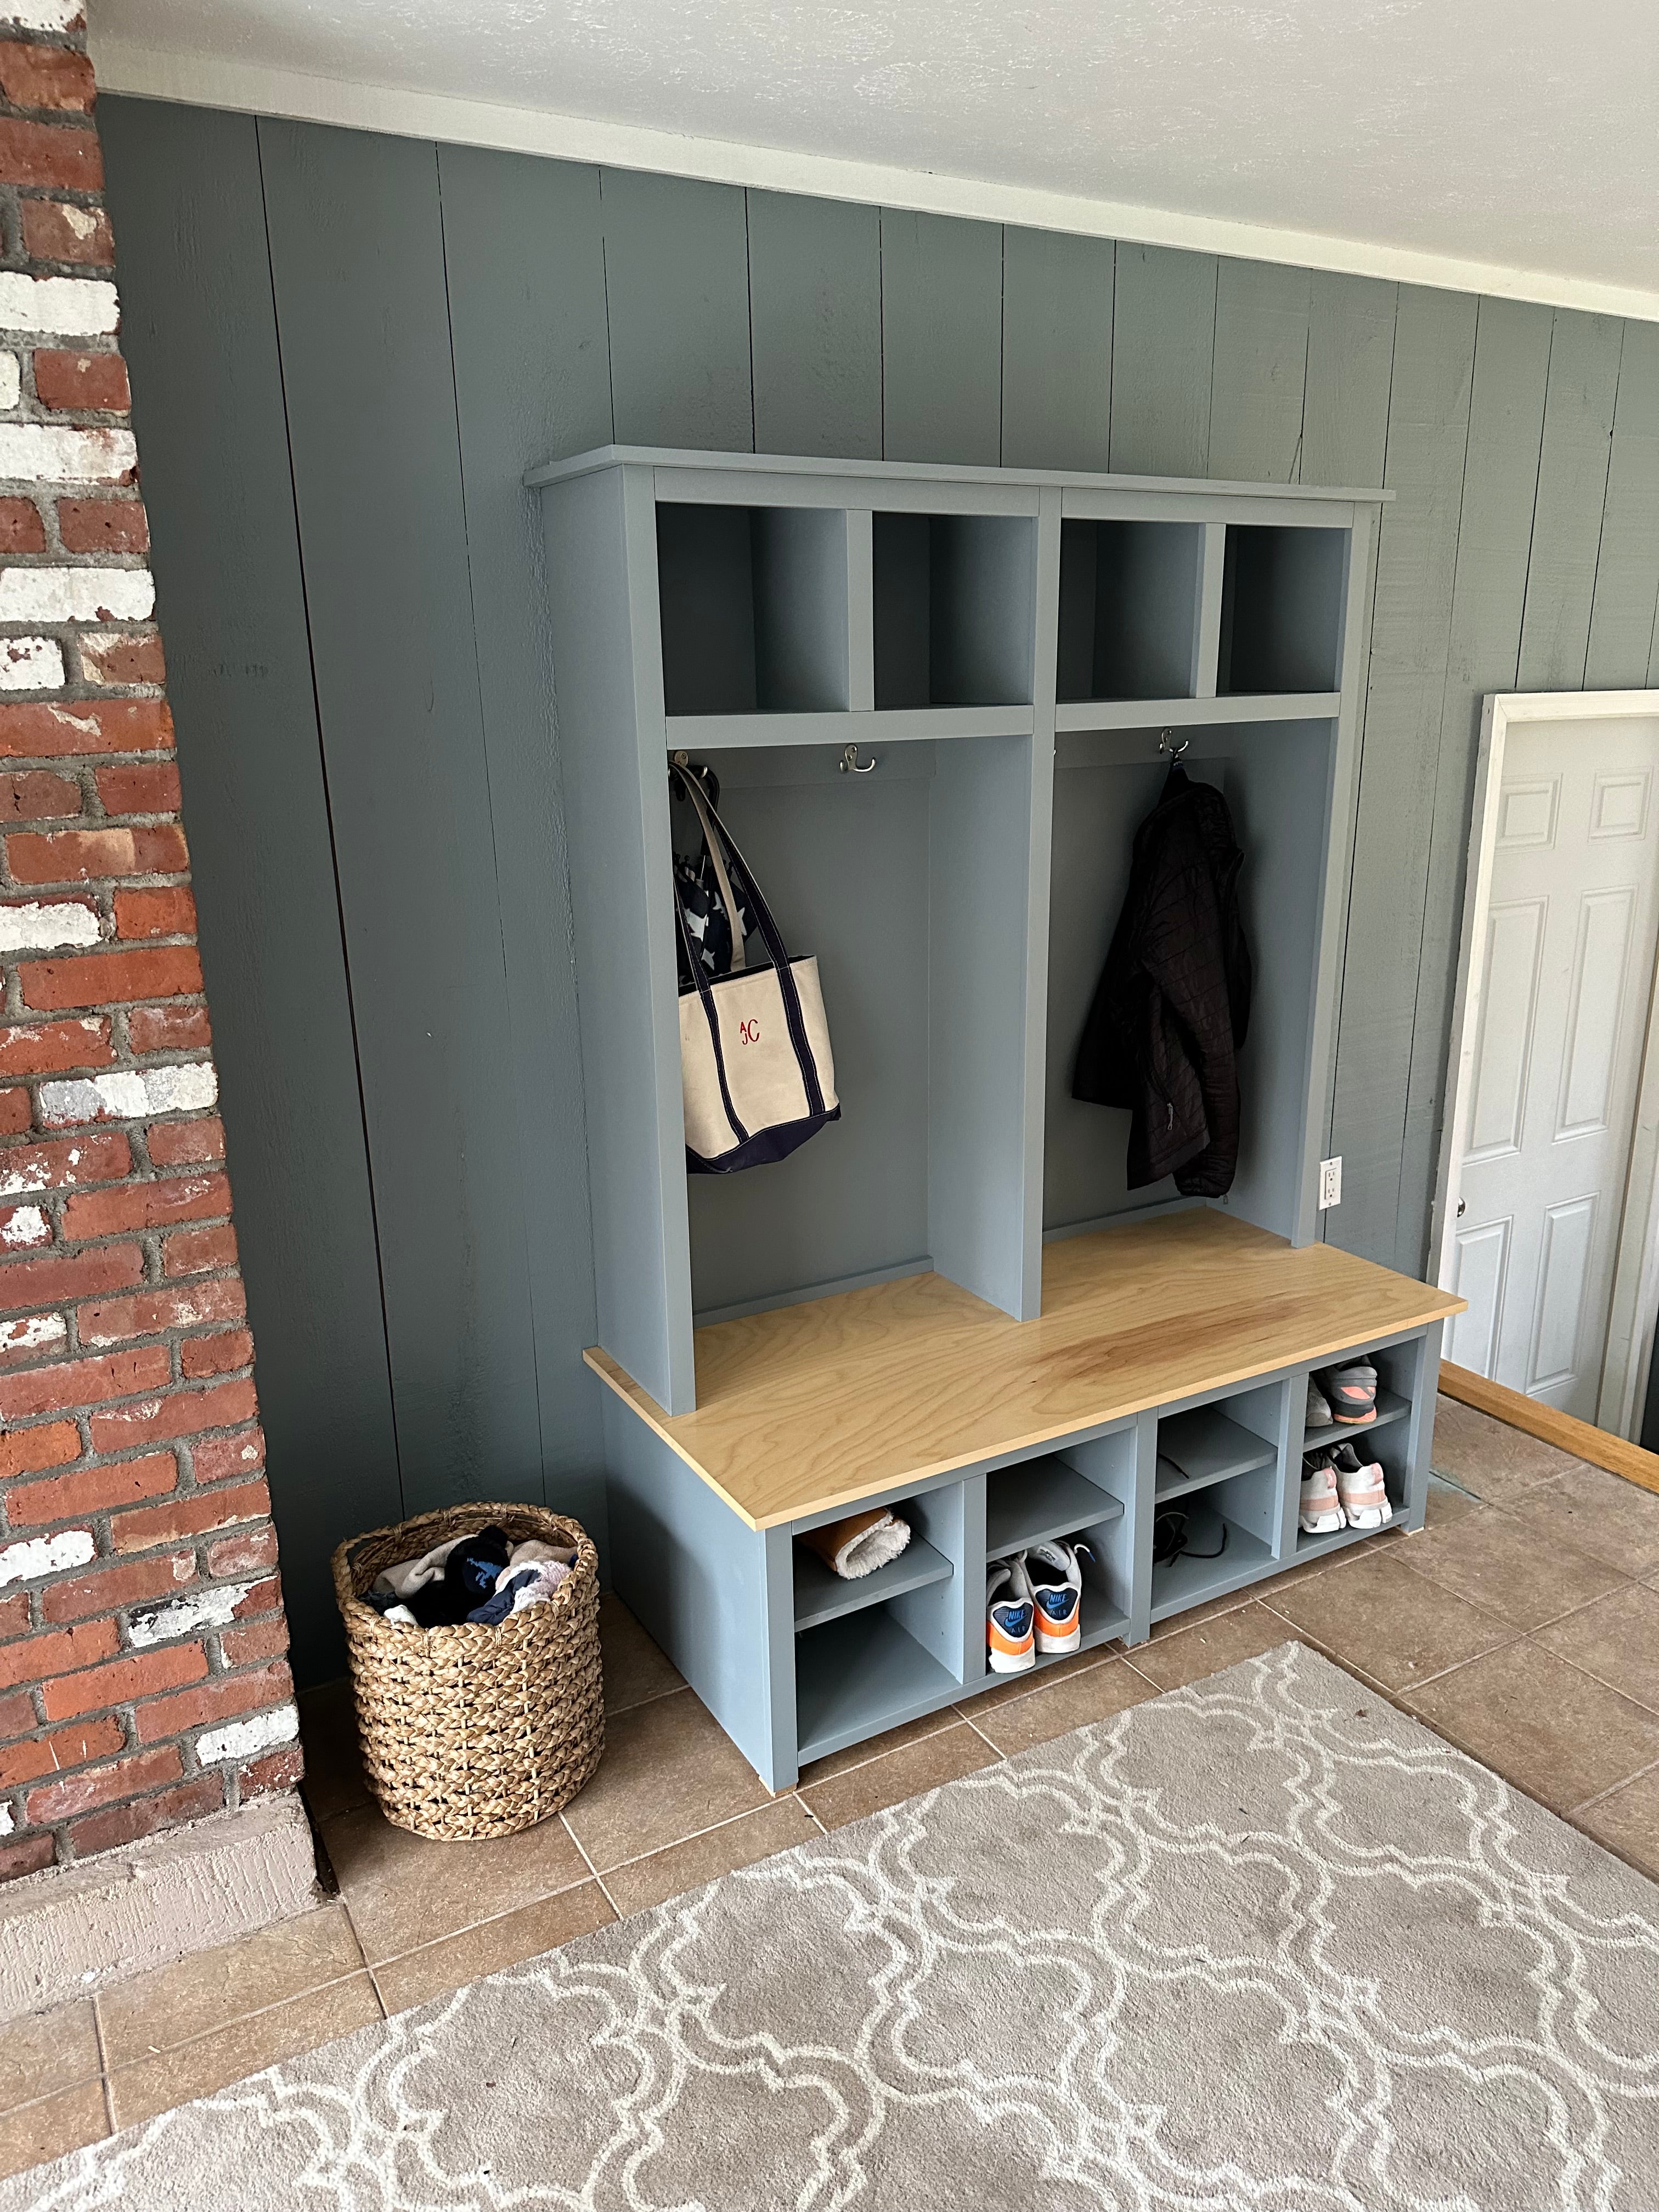 Custom hall tree in front entryway of home built in birch with open storage in the base, a section for hanging coats and bags, and upper cubby storage painted a sage green.